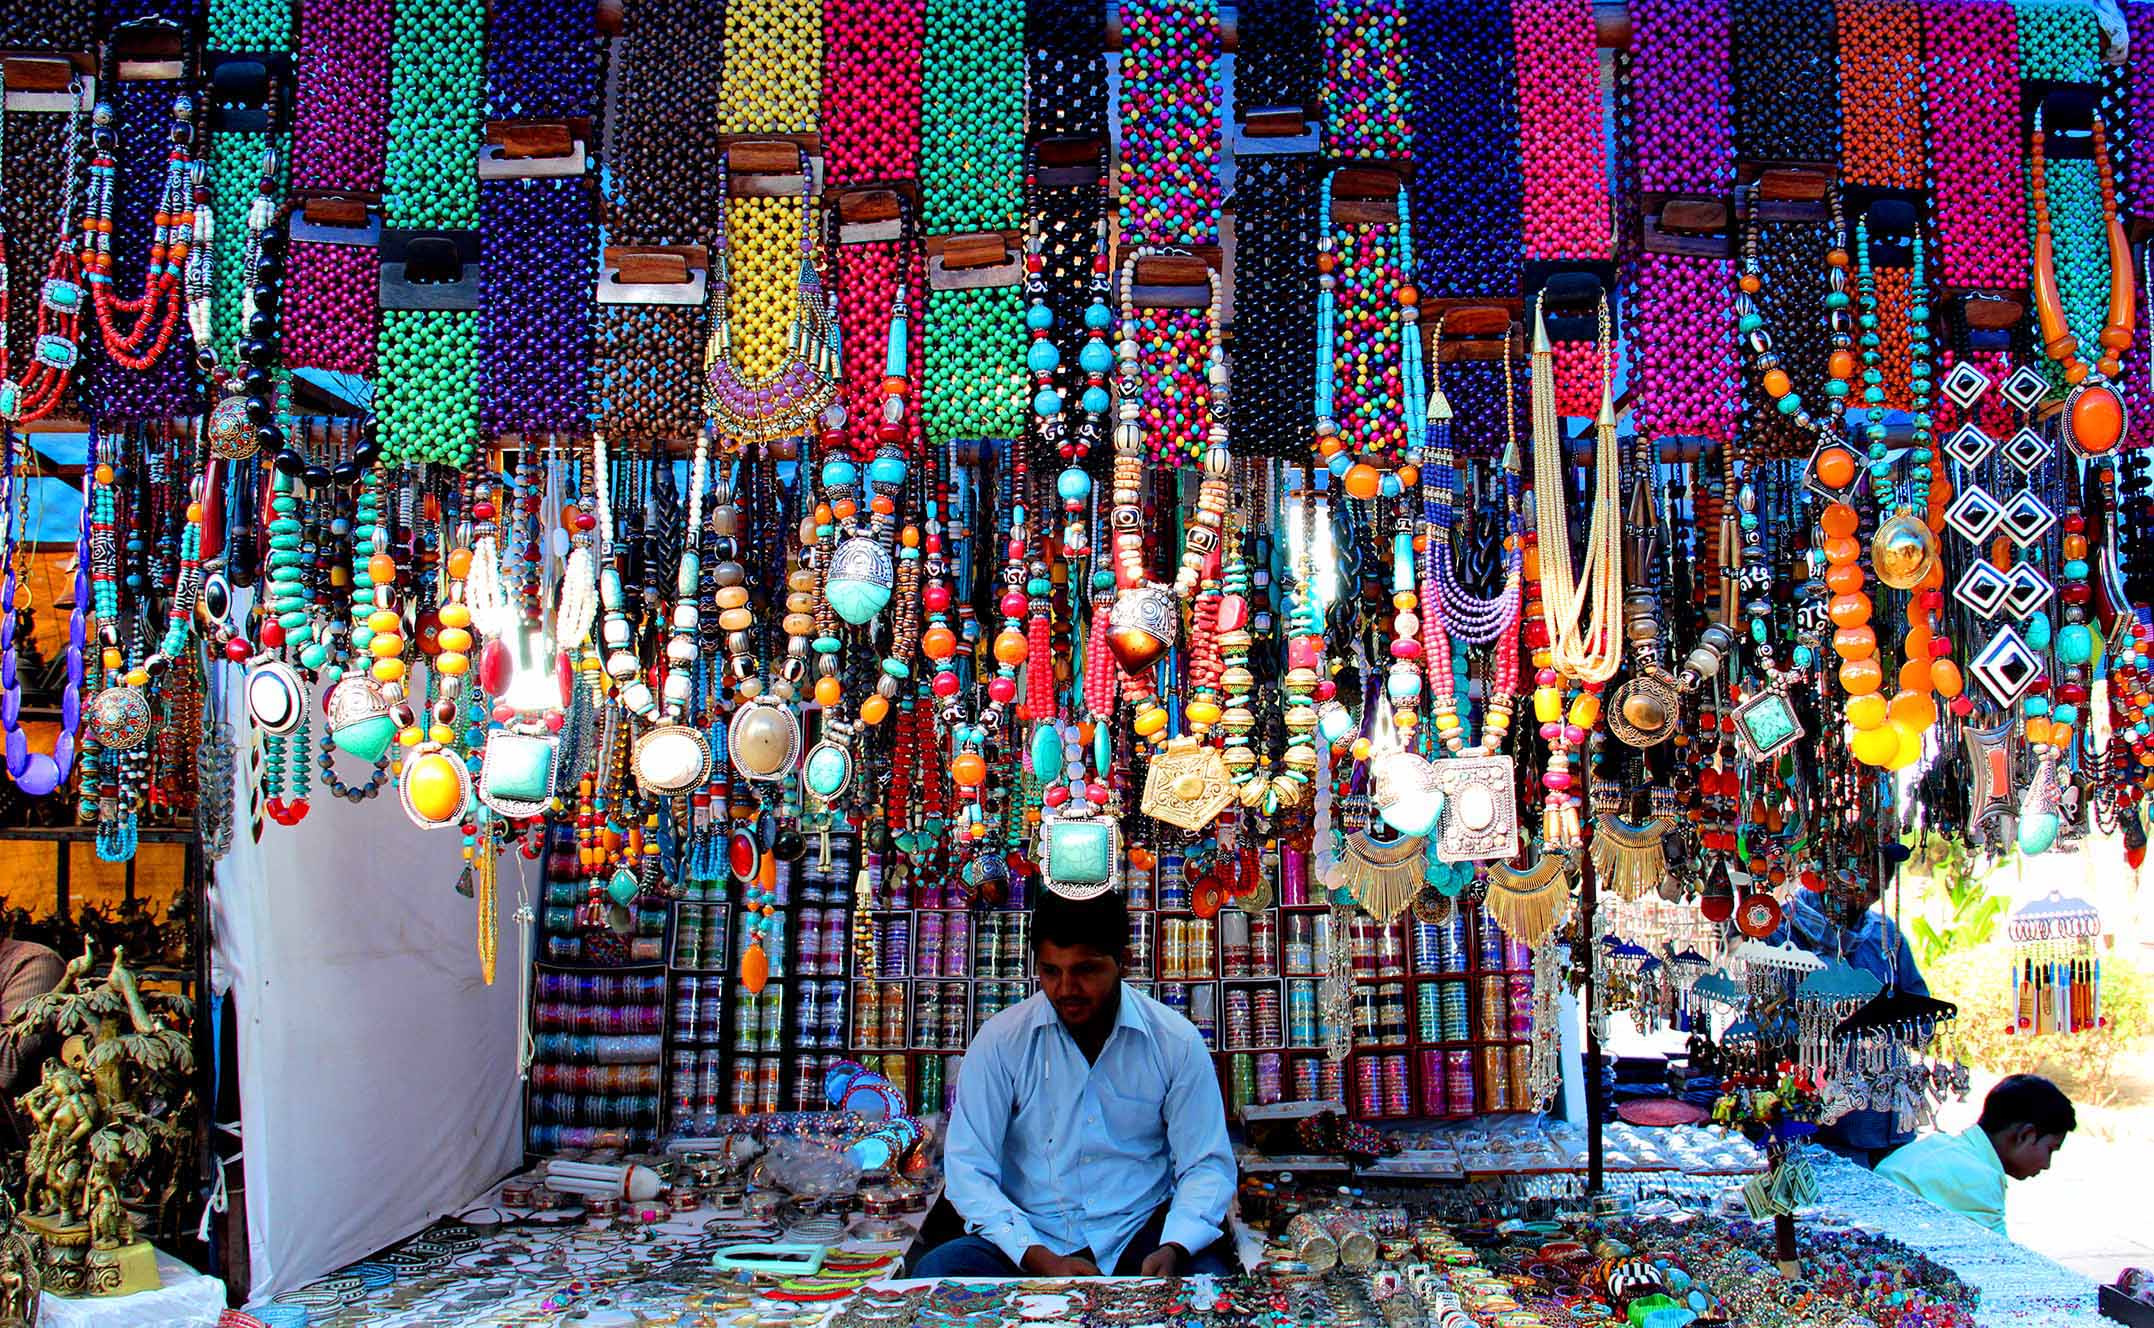  New Delhi: A stall decorated with colourful jewellery at Dilli Haat in New Delhi. LokMarg.com Photo by Rajnish Katyal 